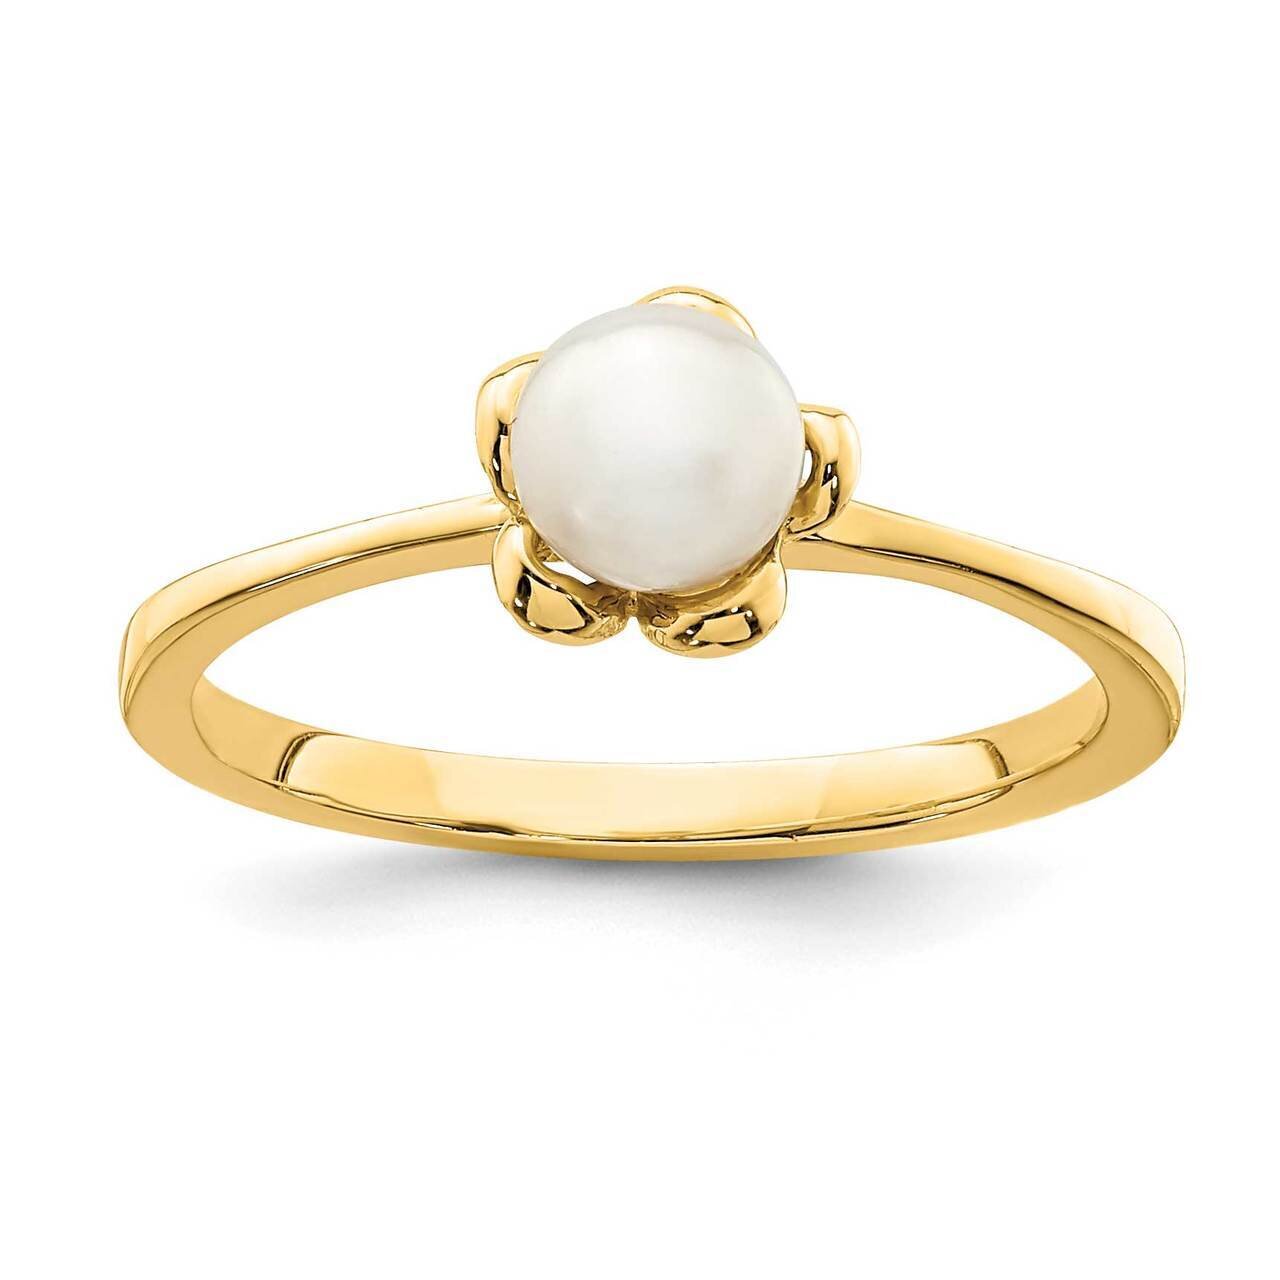 4-5mm White Button Freshwater Cultured Pearl Flower Ring 14k Gold SE2881